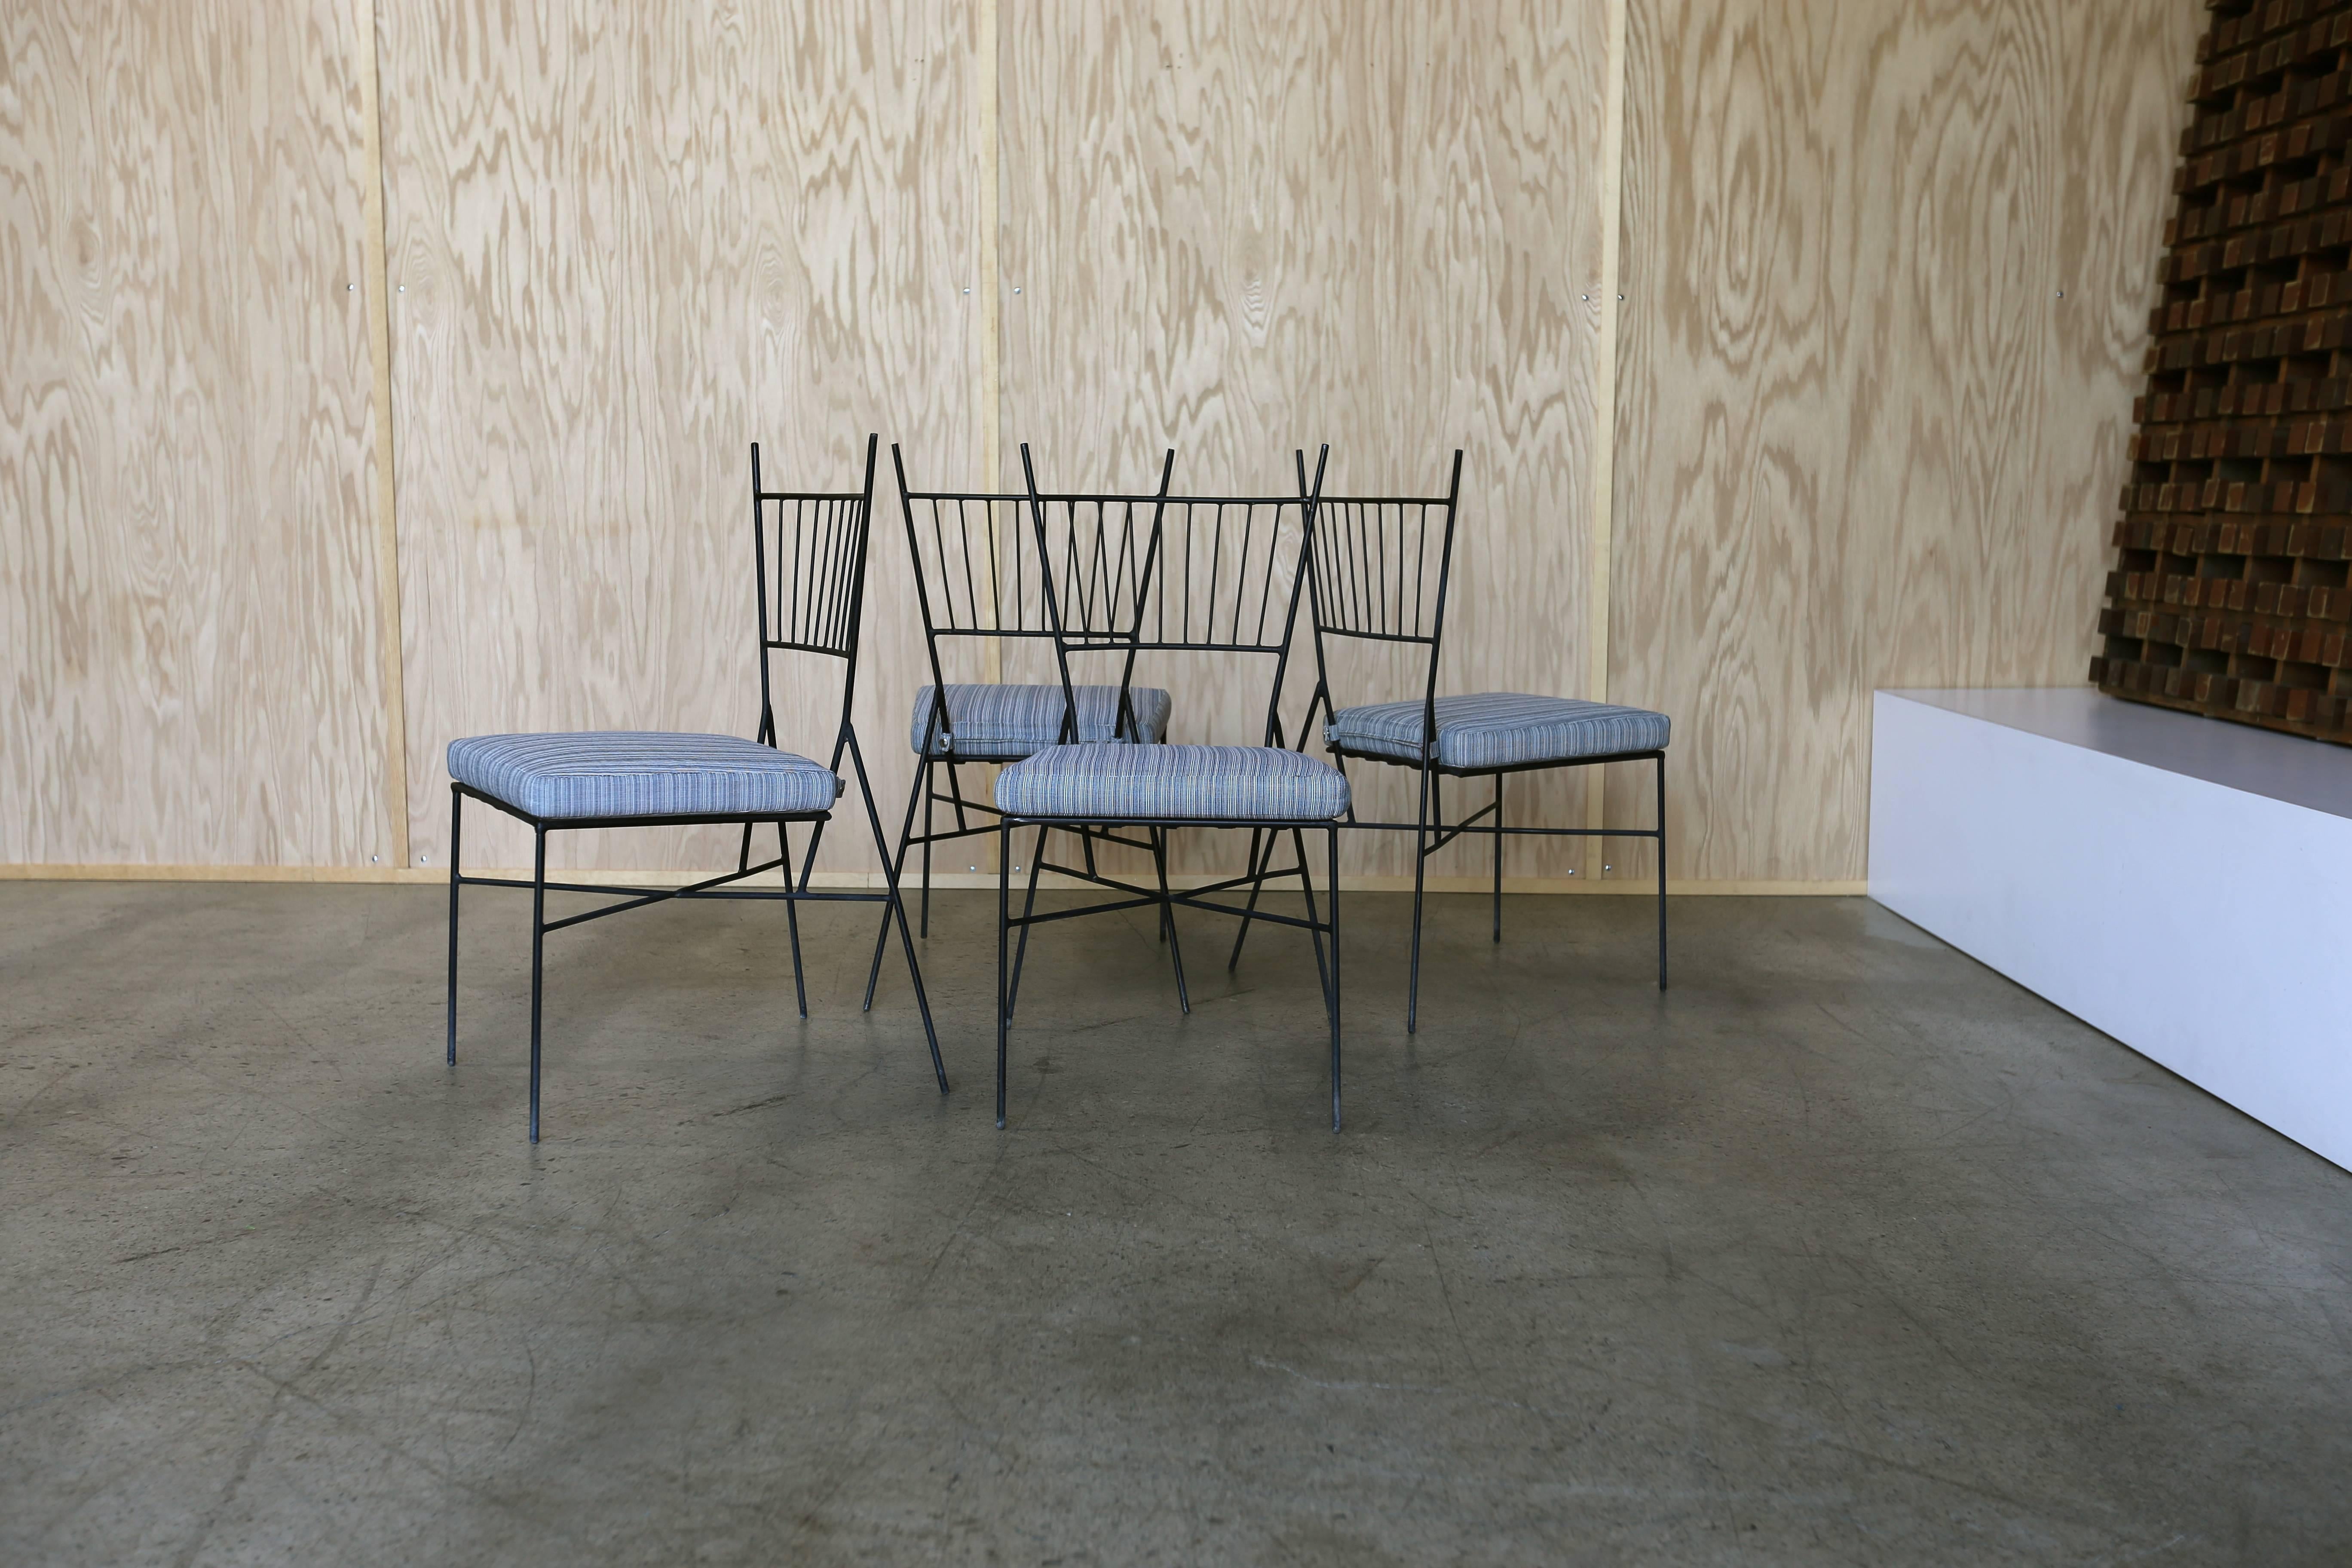 Pavilion collection iron dining chairs by Paul McCobb for Arbuck.